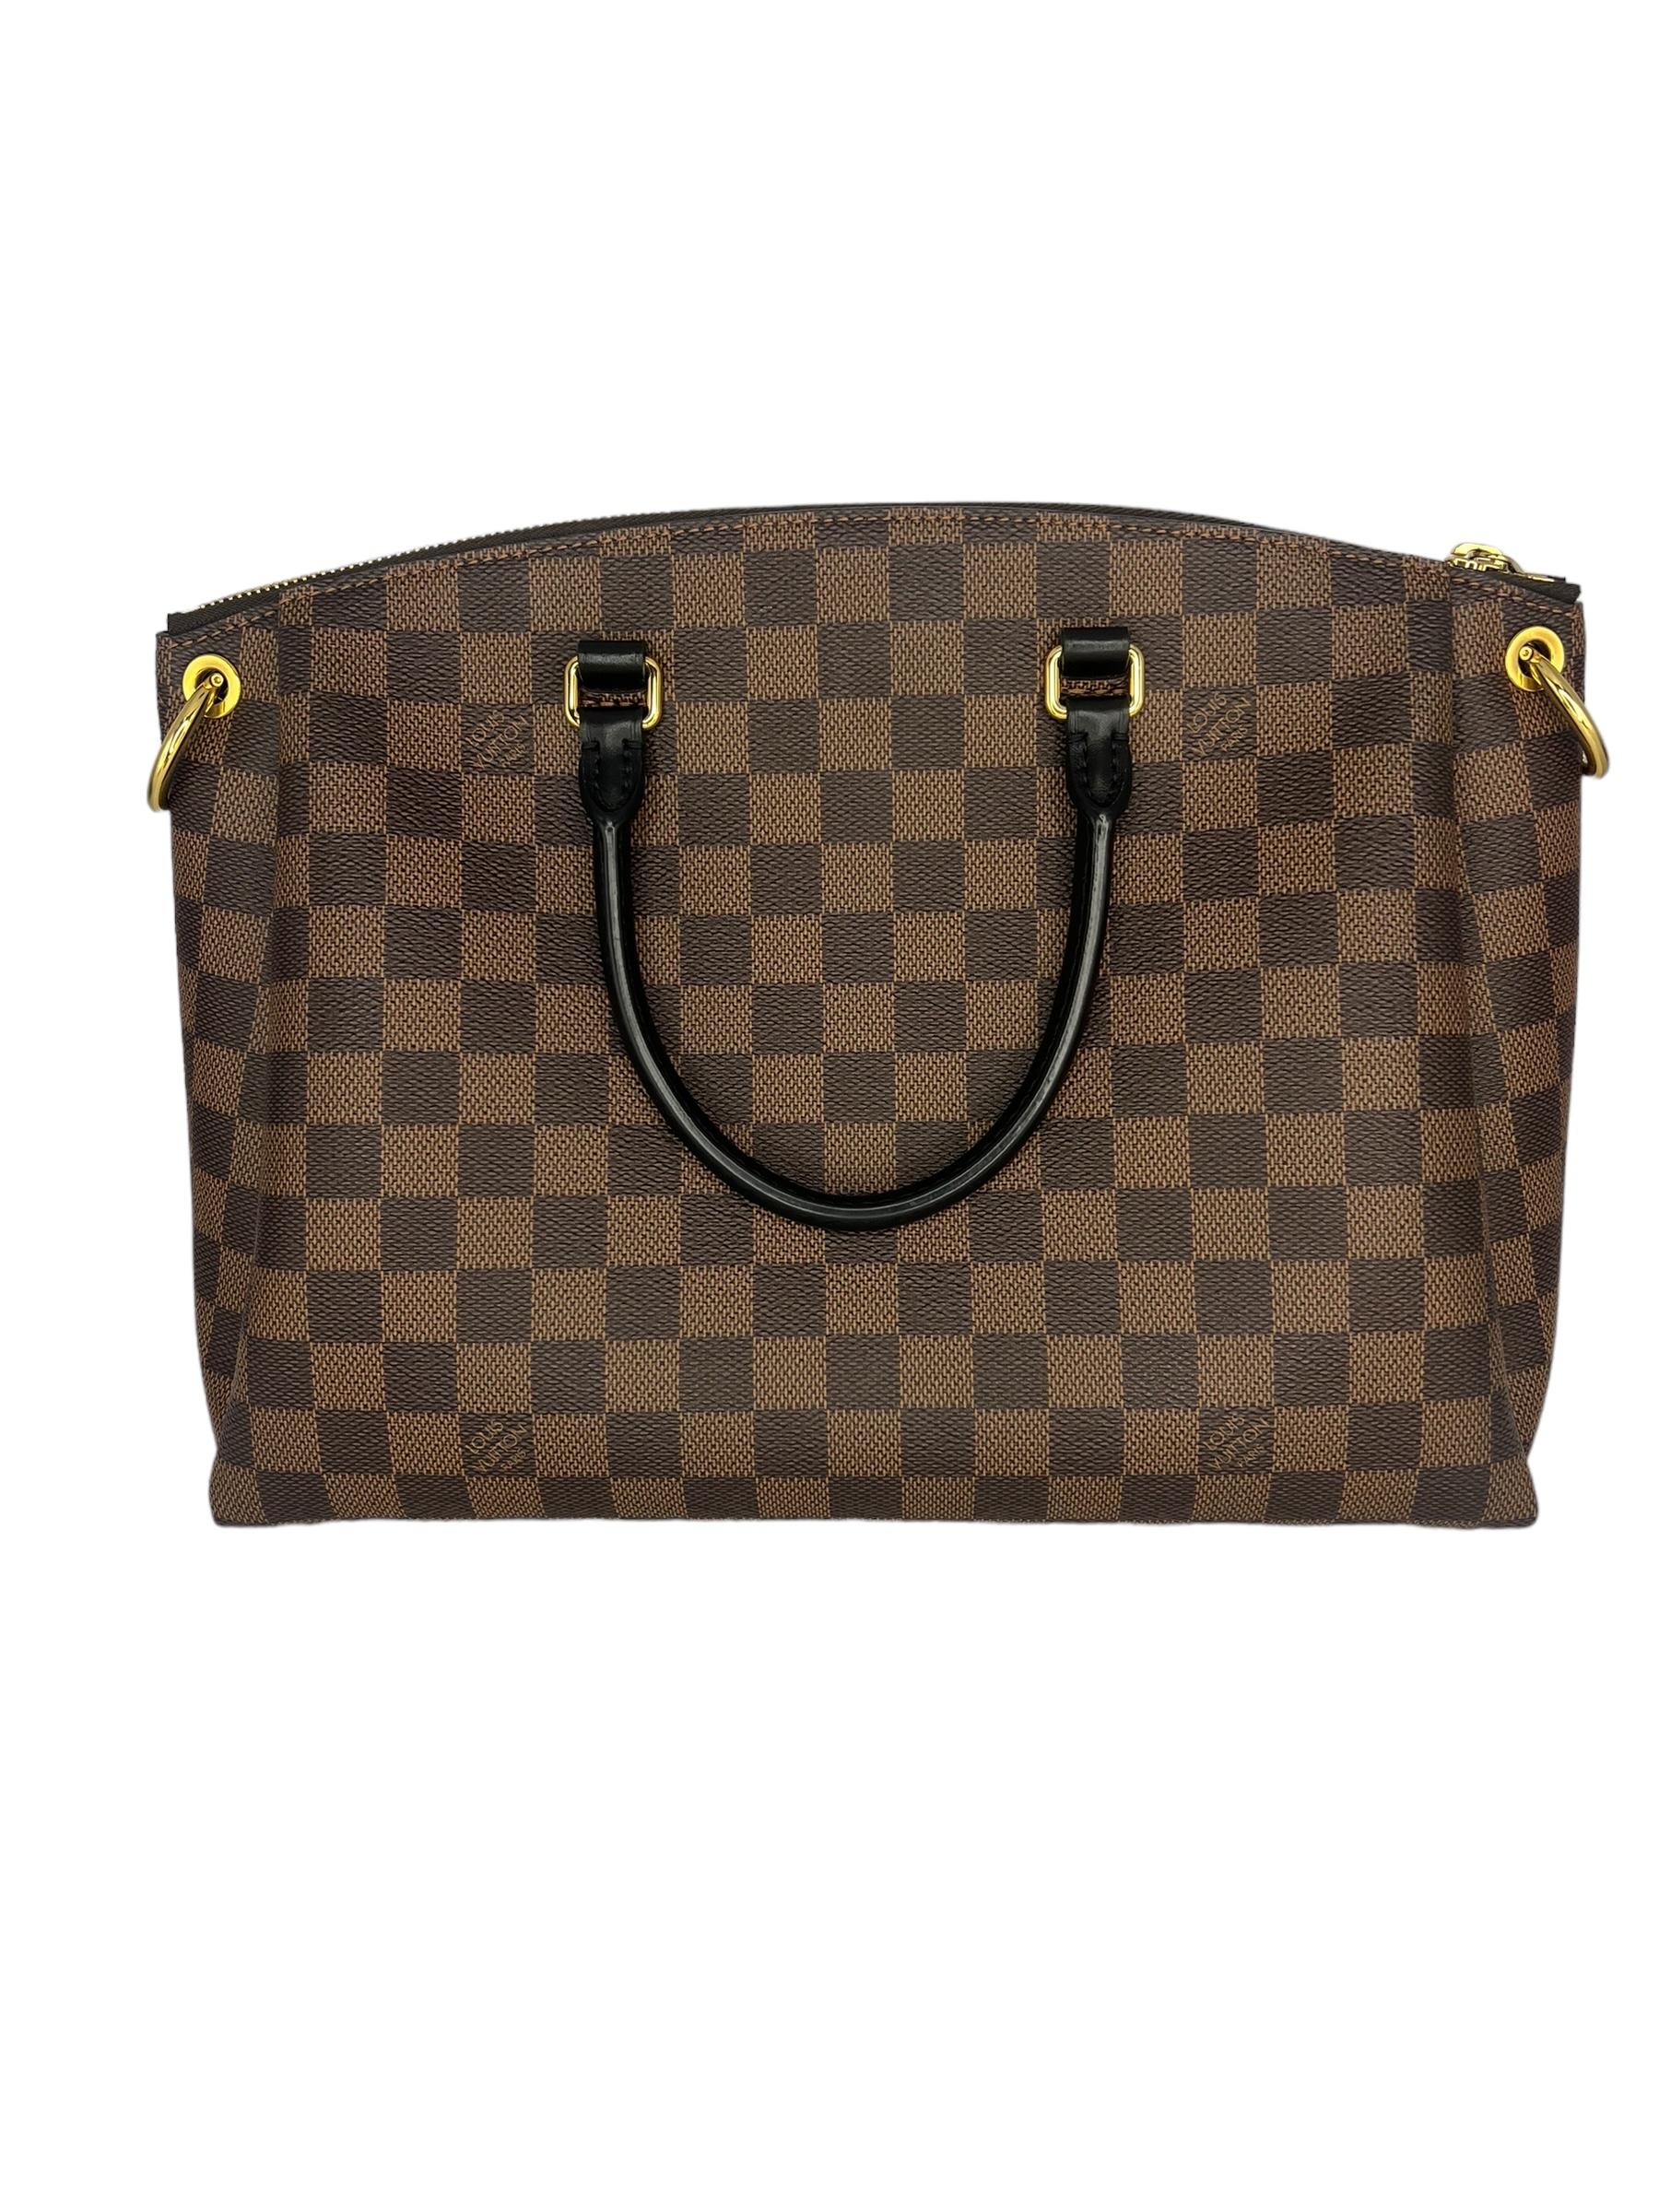 This is an authentic Louis Vuitton Damier Ebene Odeon Tote MM in Black. This bag features black leather handles. Optional adjustable strap in black leather. Zipper opens to fabric interior with patch pockets.

Designer: Louis Vuitton
Material: